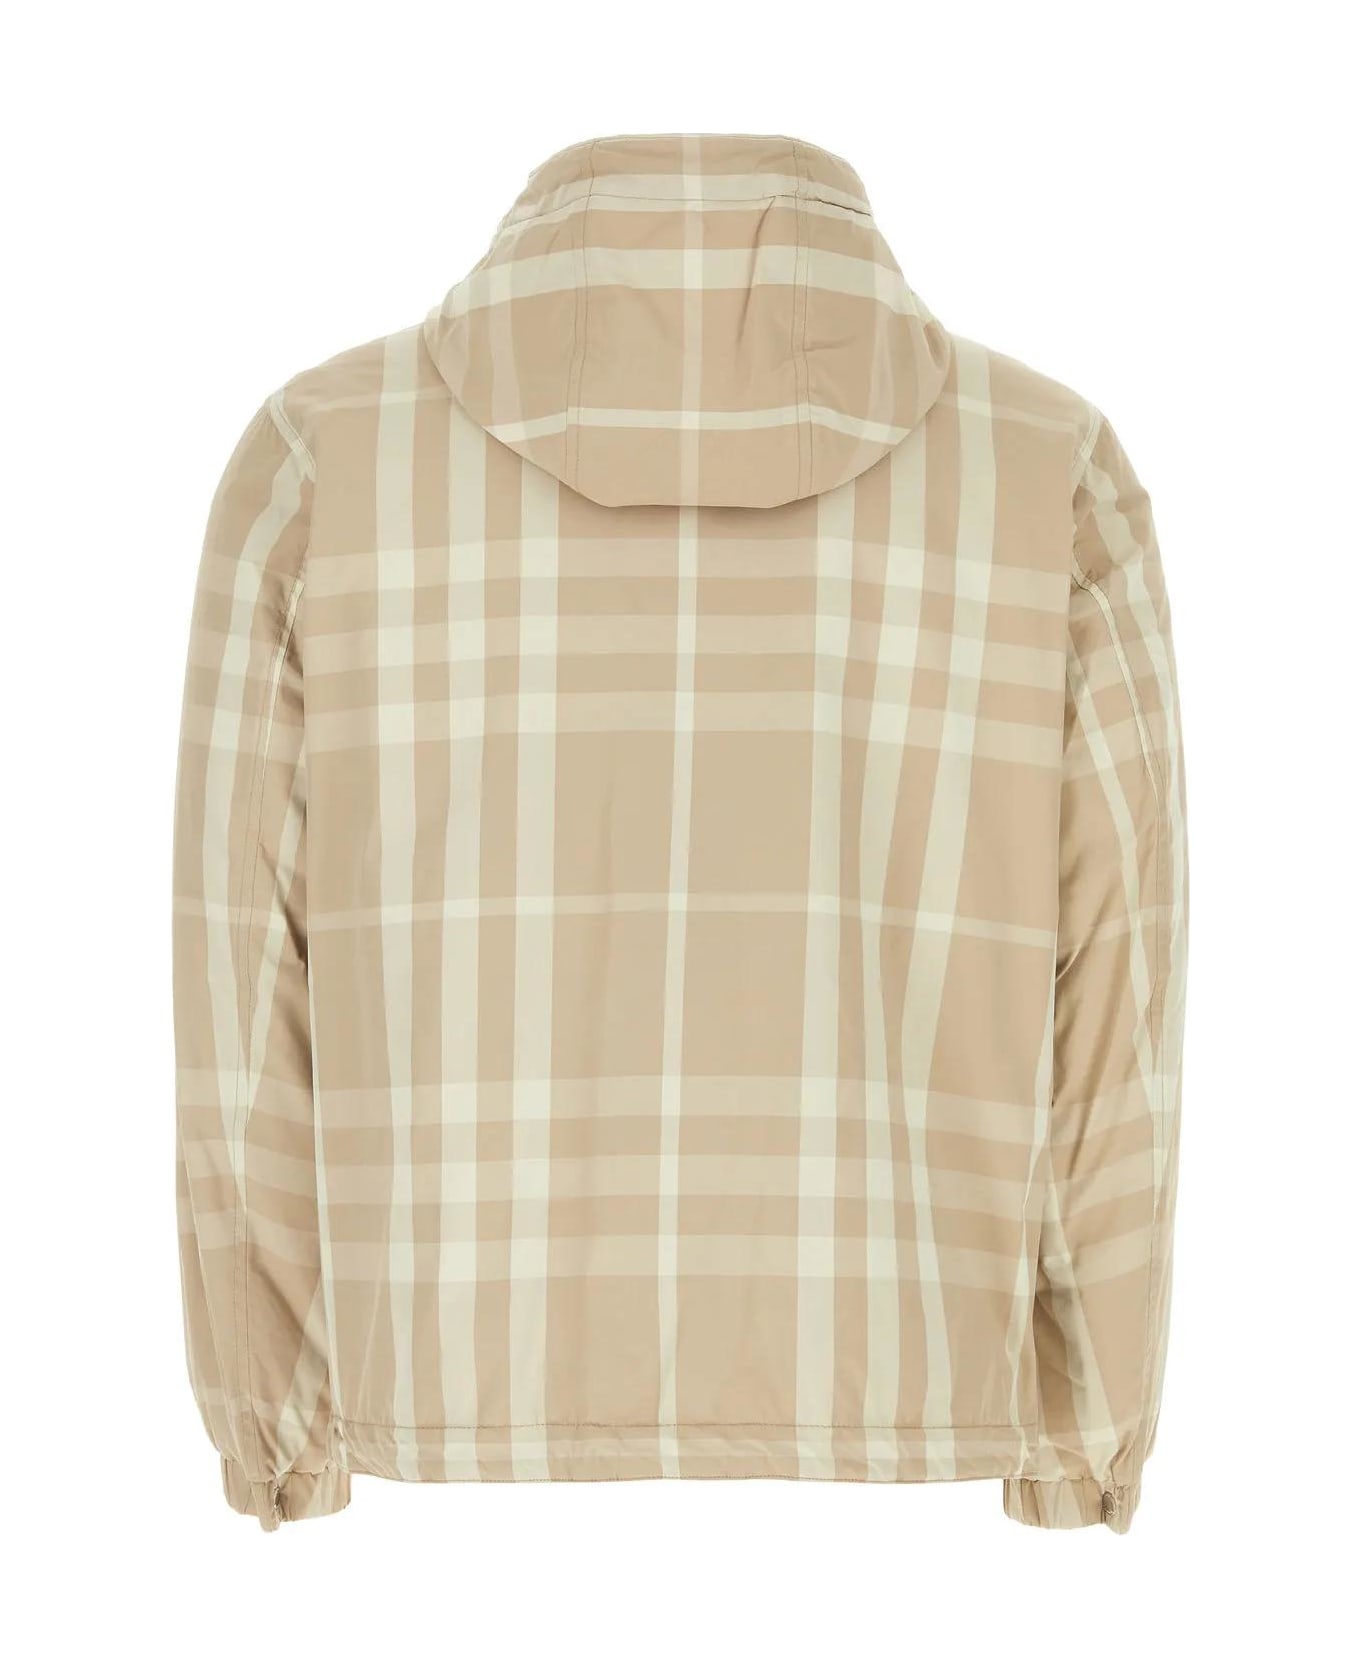 Burberry Embroidered Nylon Reversible Jacket - Beige